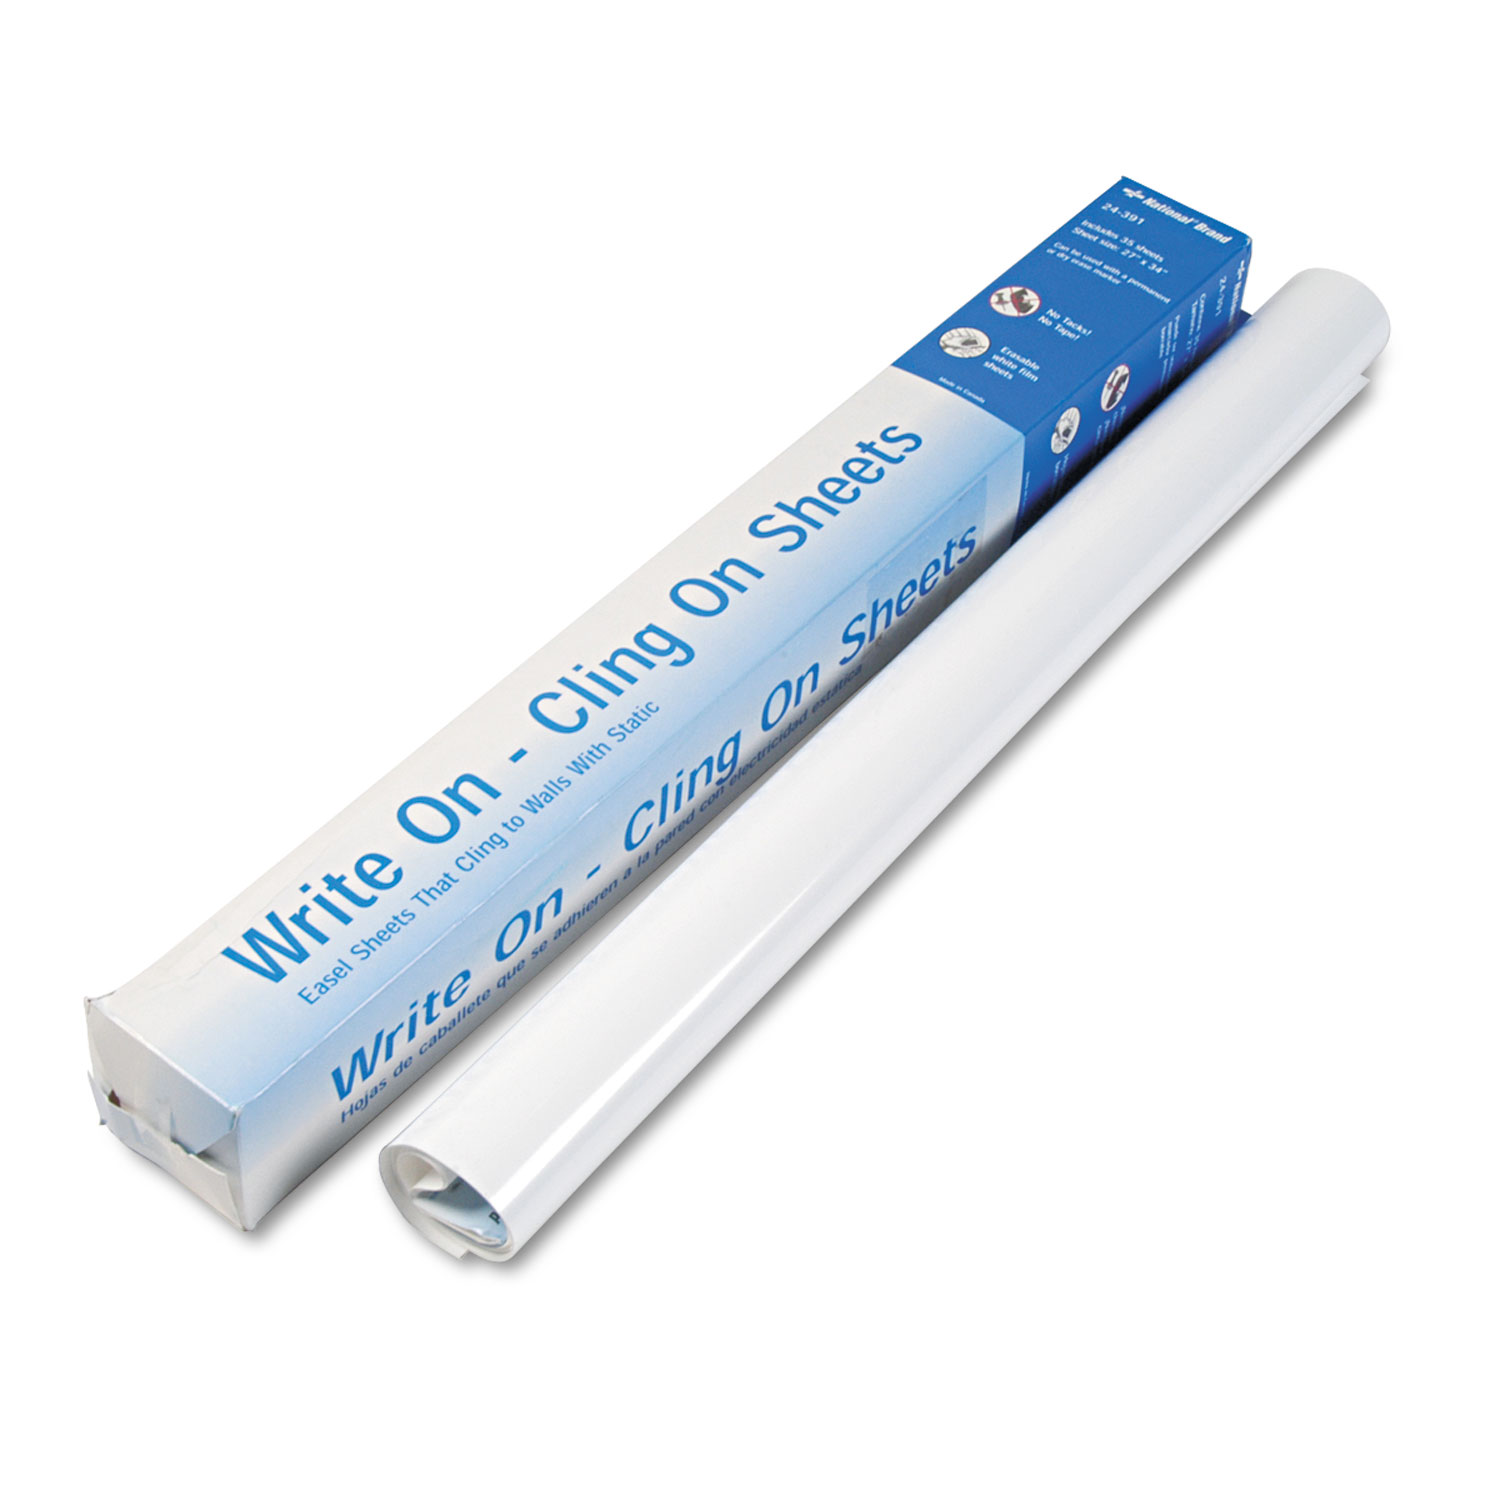 Write On Cling On Easel Pad, Unruled, 27 x 34, White, 35 Sheets